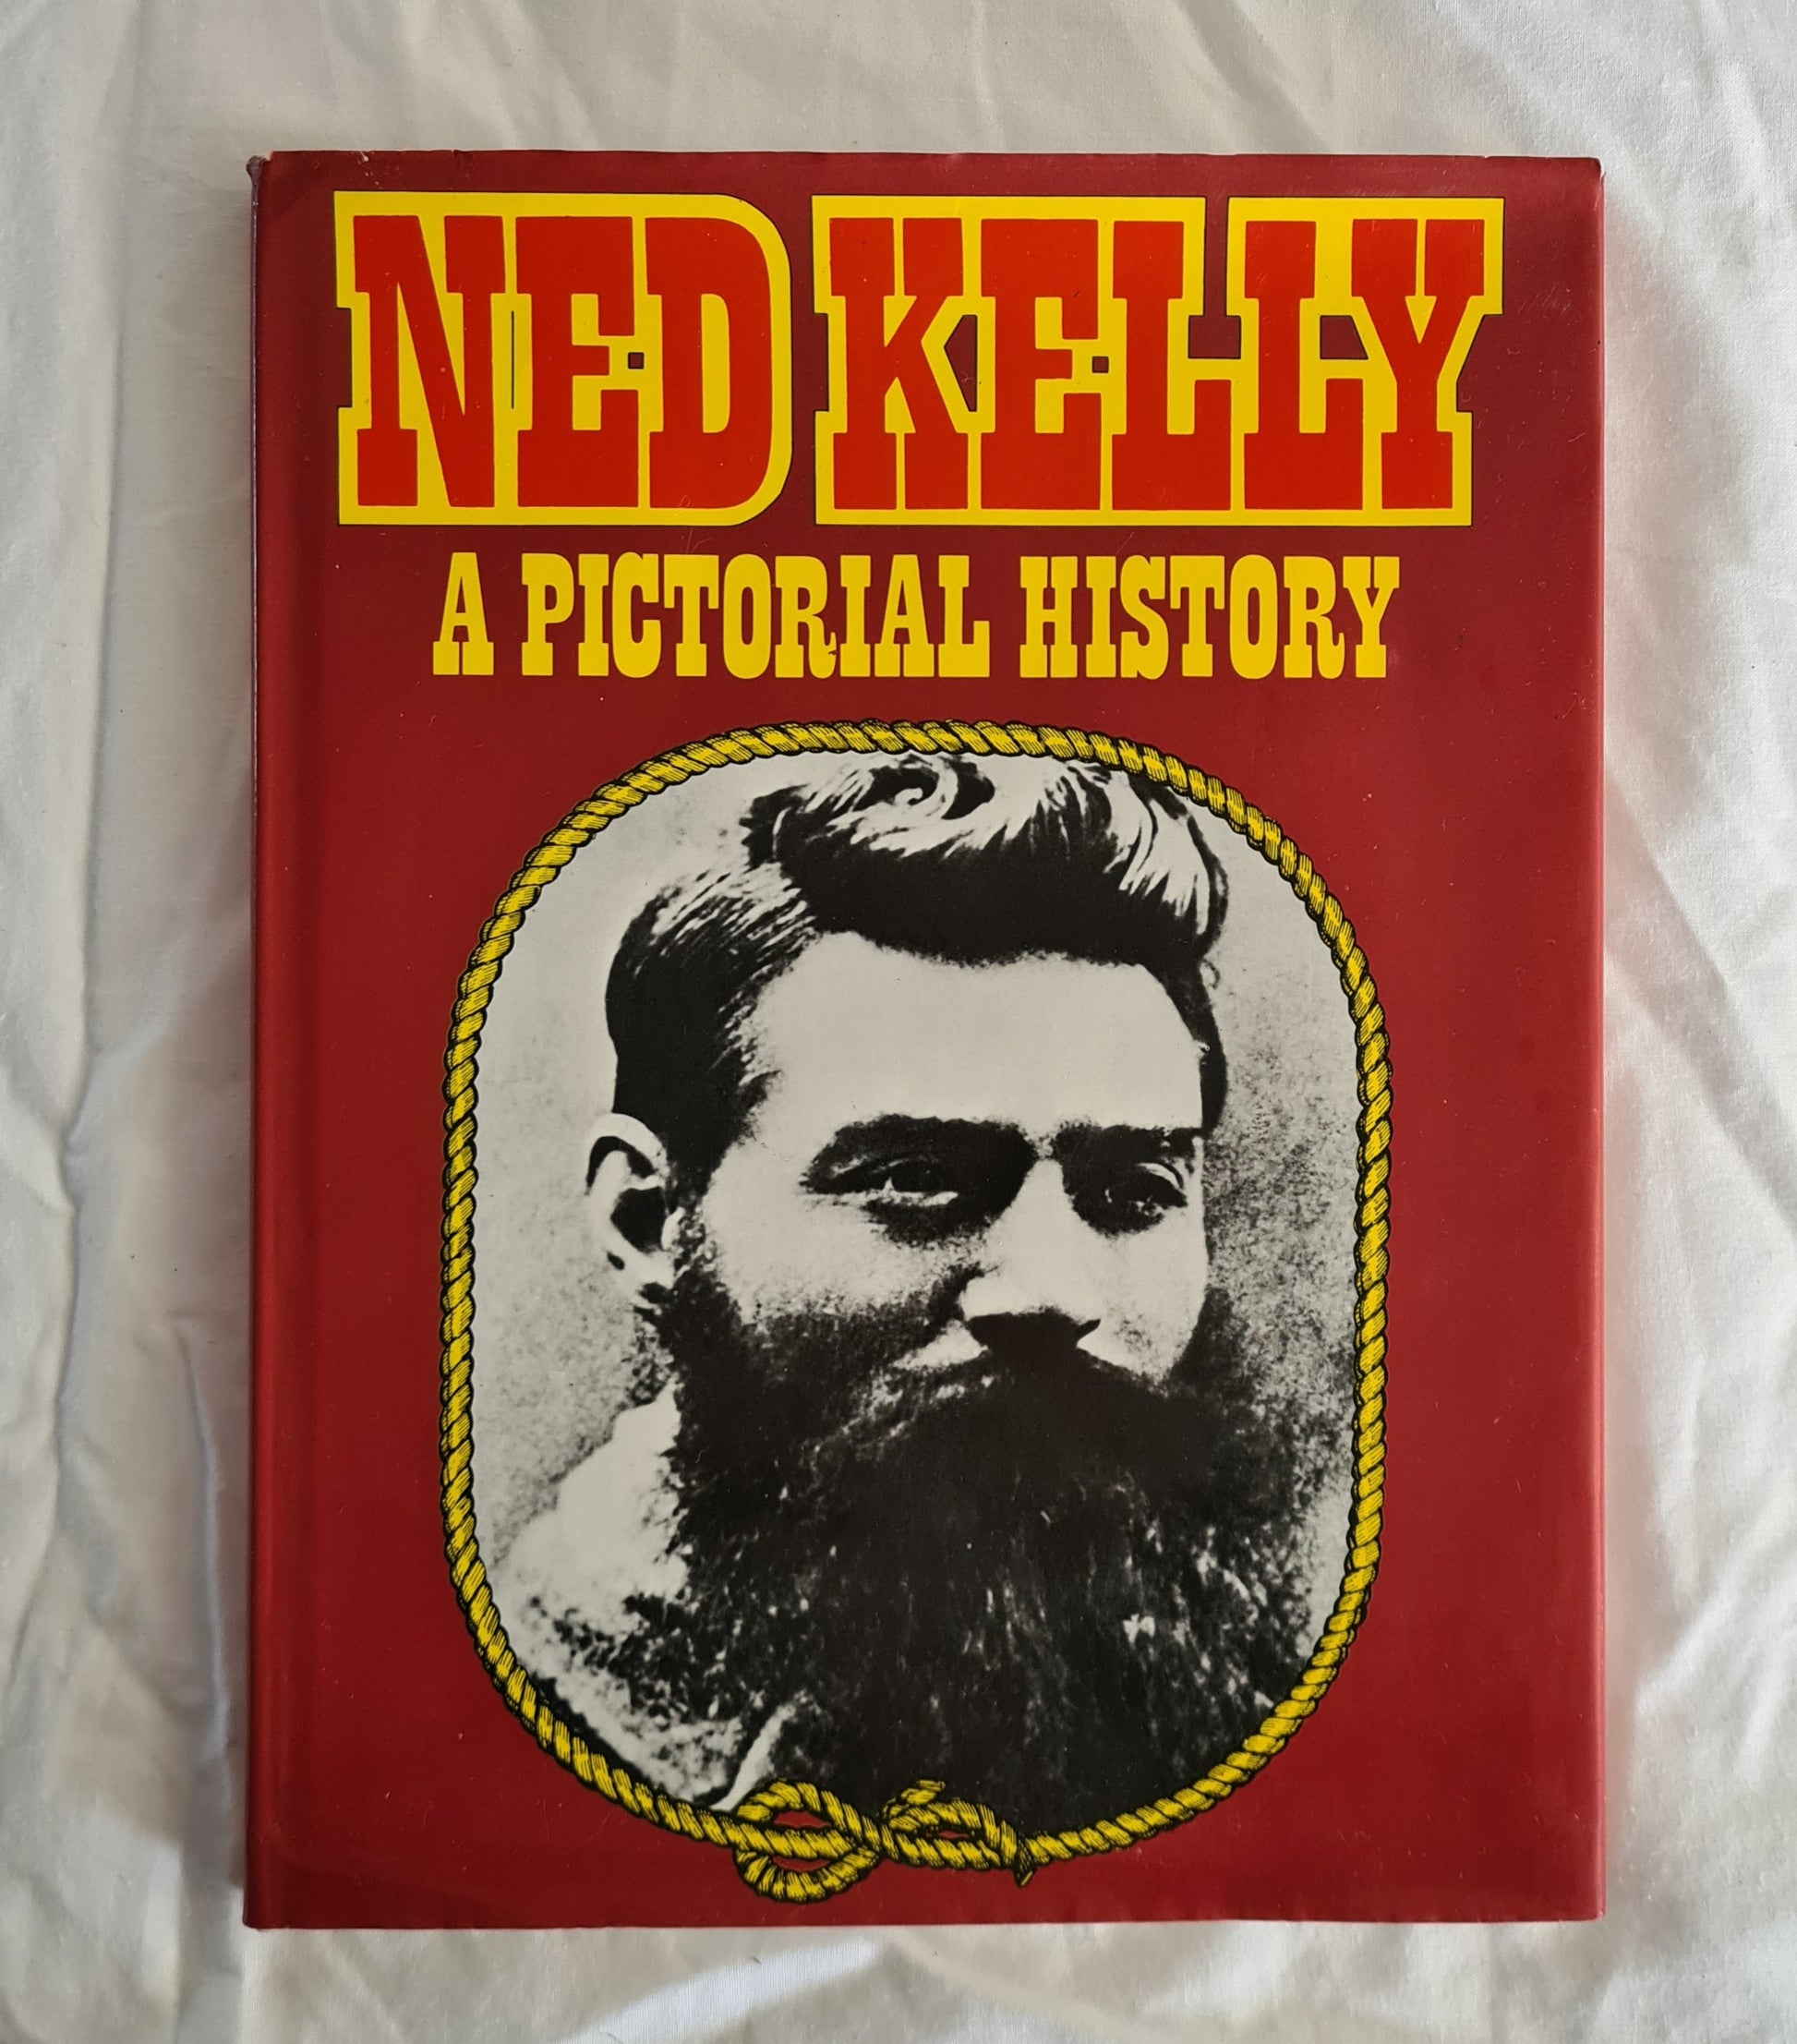 Ned Kelly A Pictorial History  by George Boxall